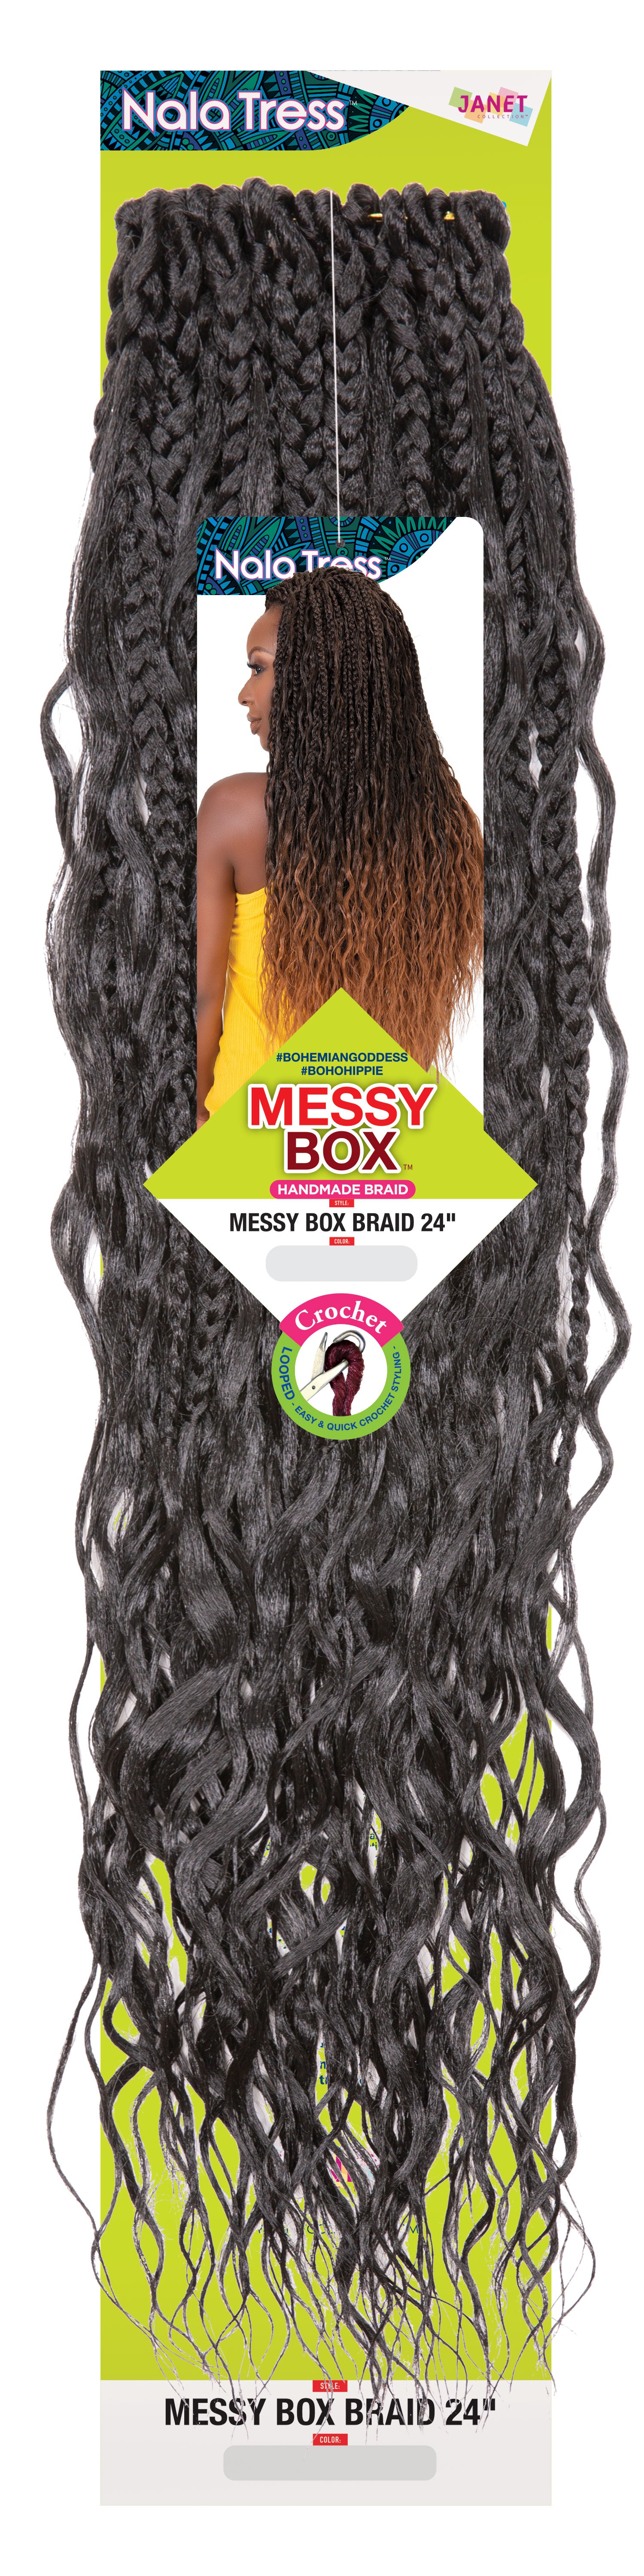 JANET COLLECTION MESSY BOX BRAID 24″